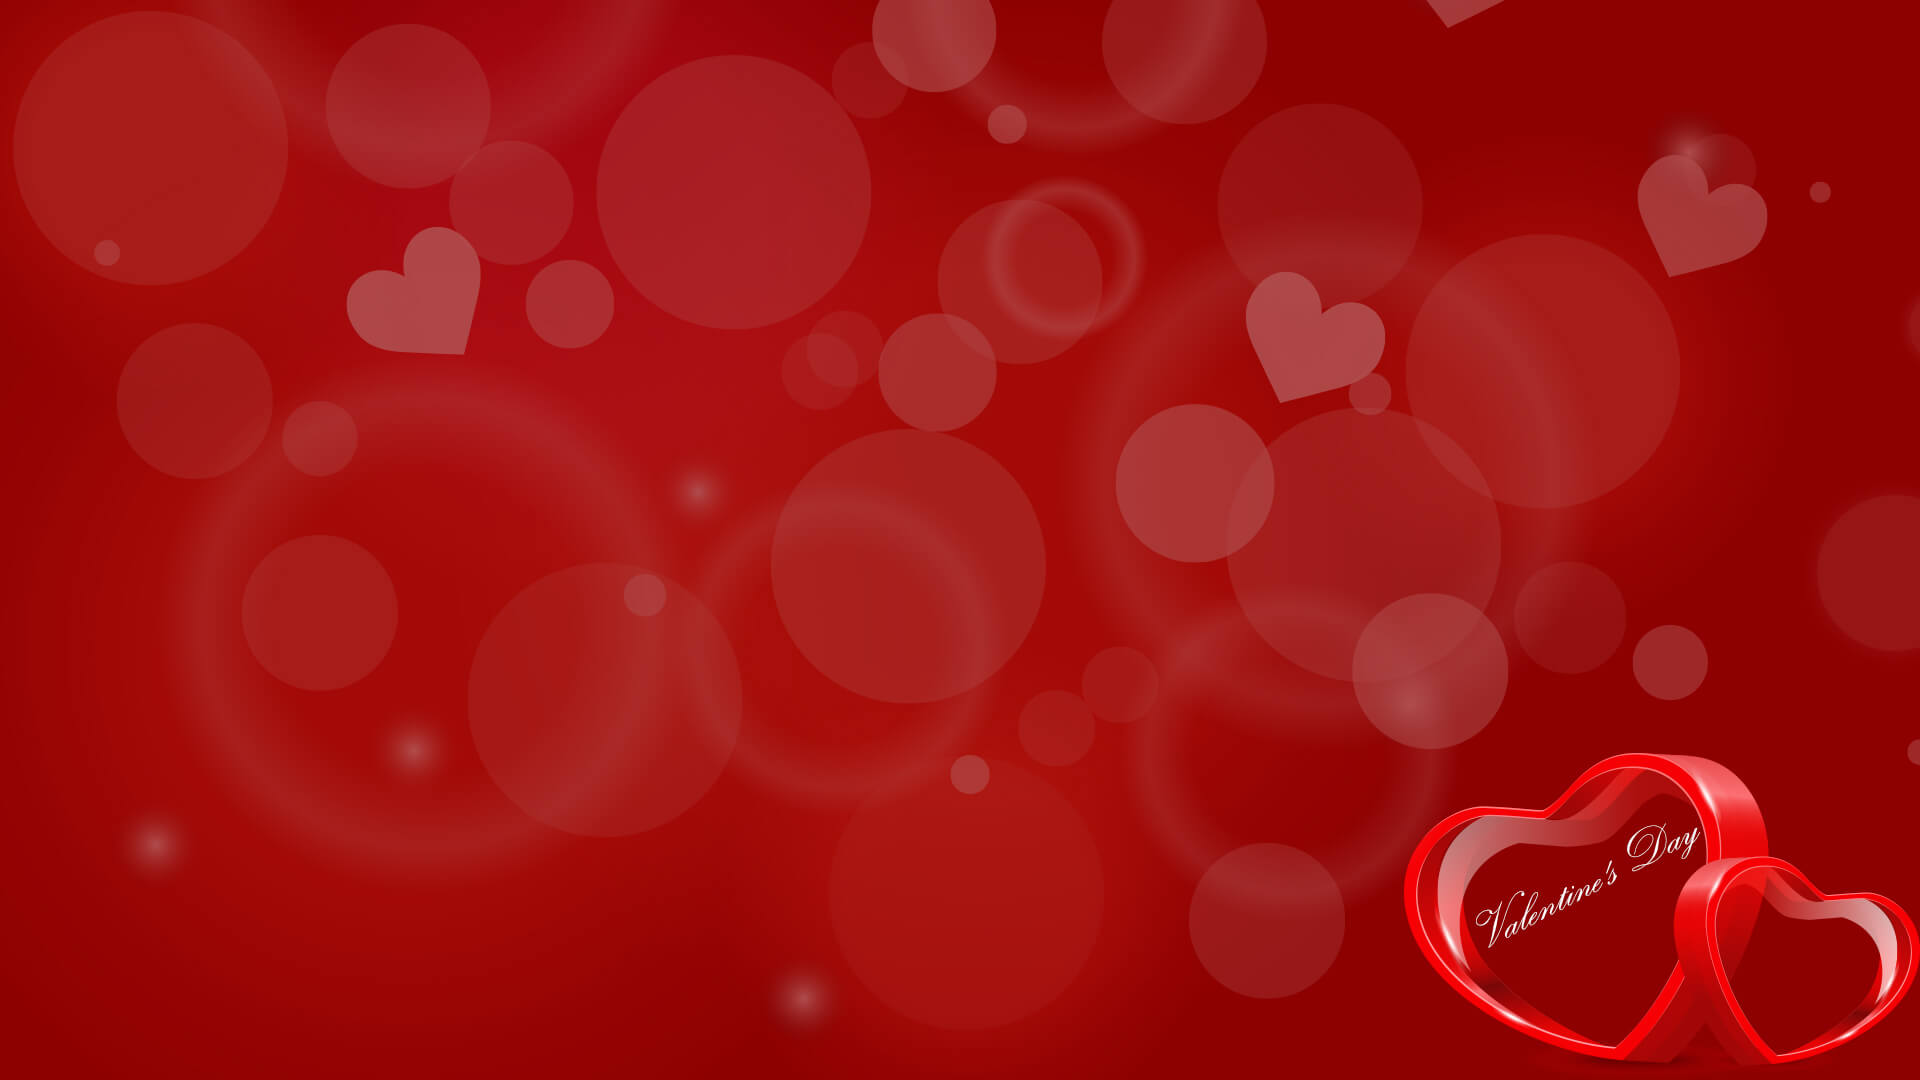 Valentines Day Heart Backgrounds For Powerpoint – Love Ppt With Regard To Valentine Powerpoint Templates Free